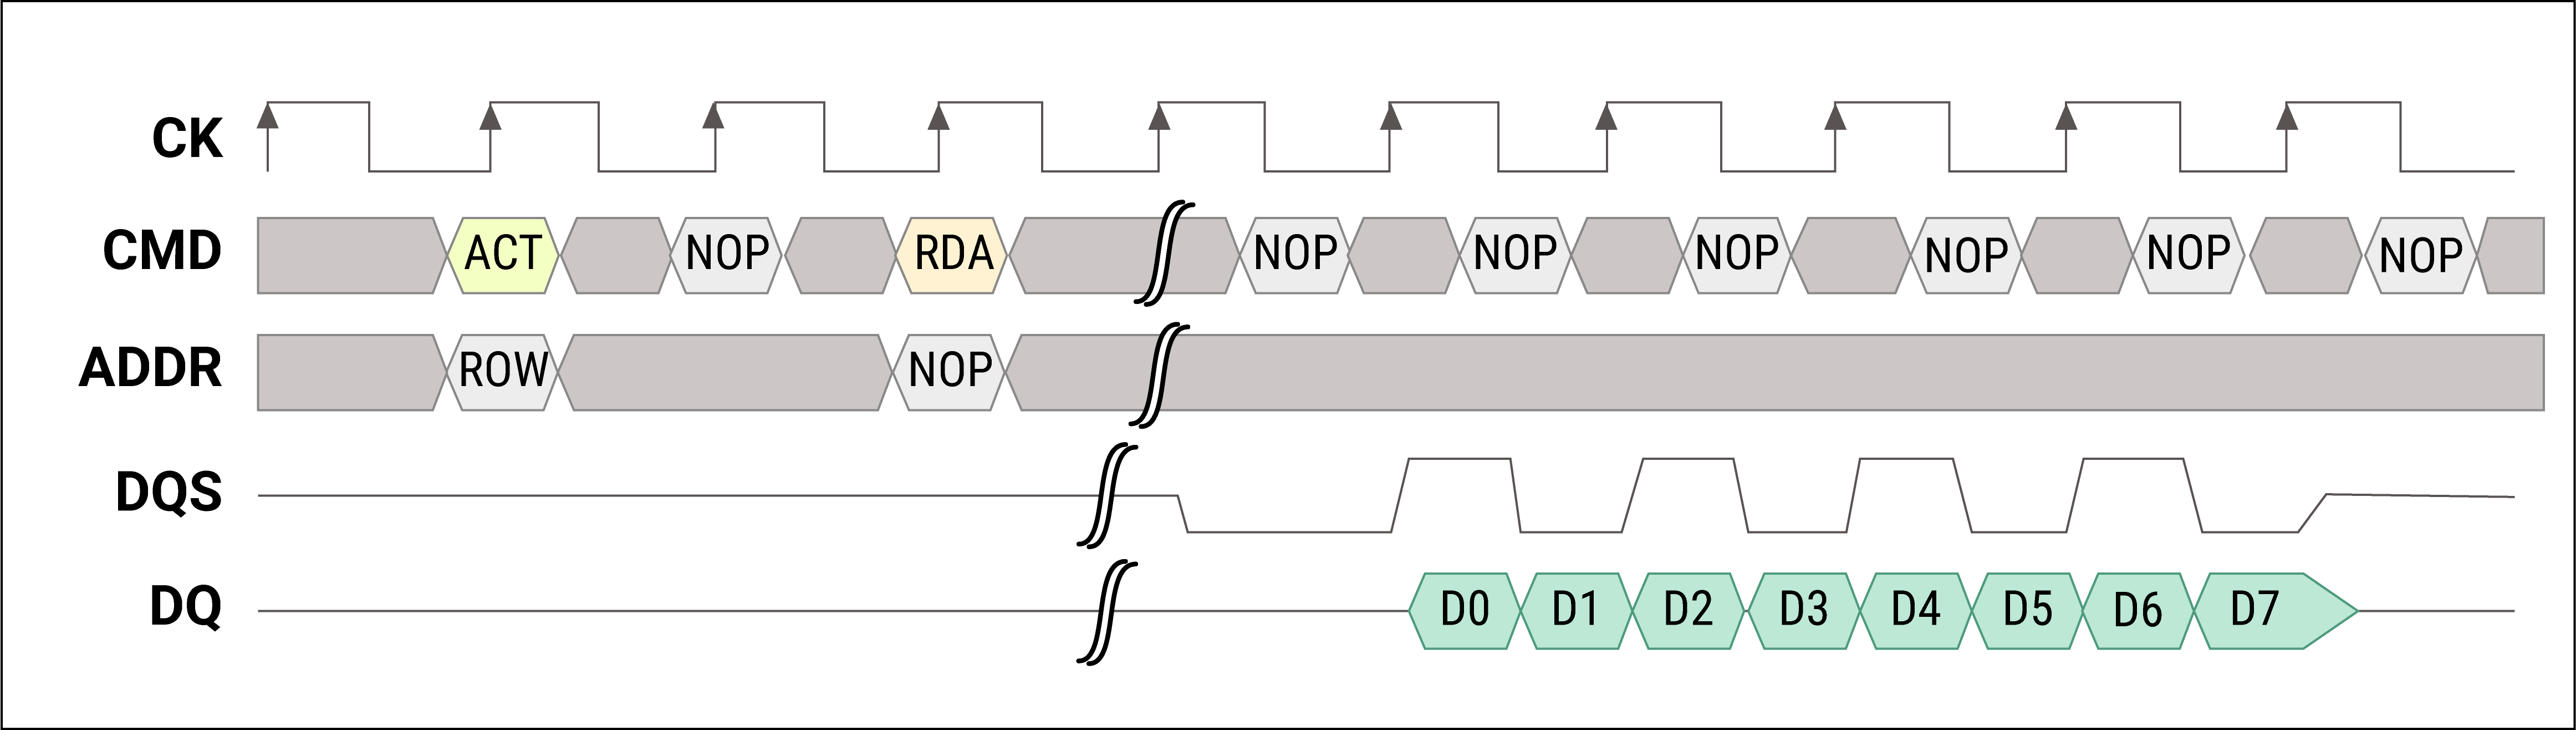 DDR memory timing diagram of read and write